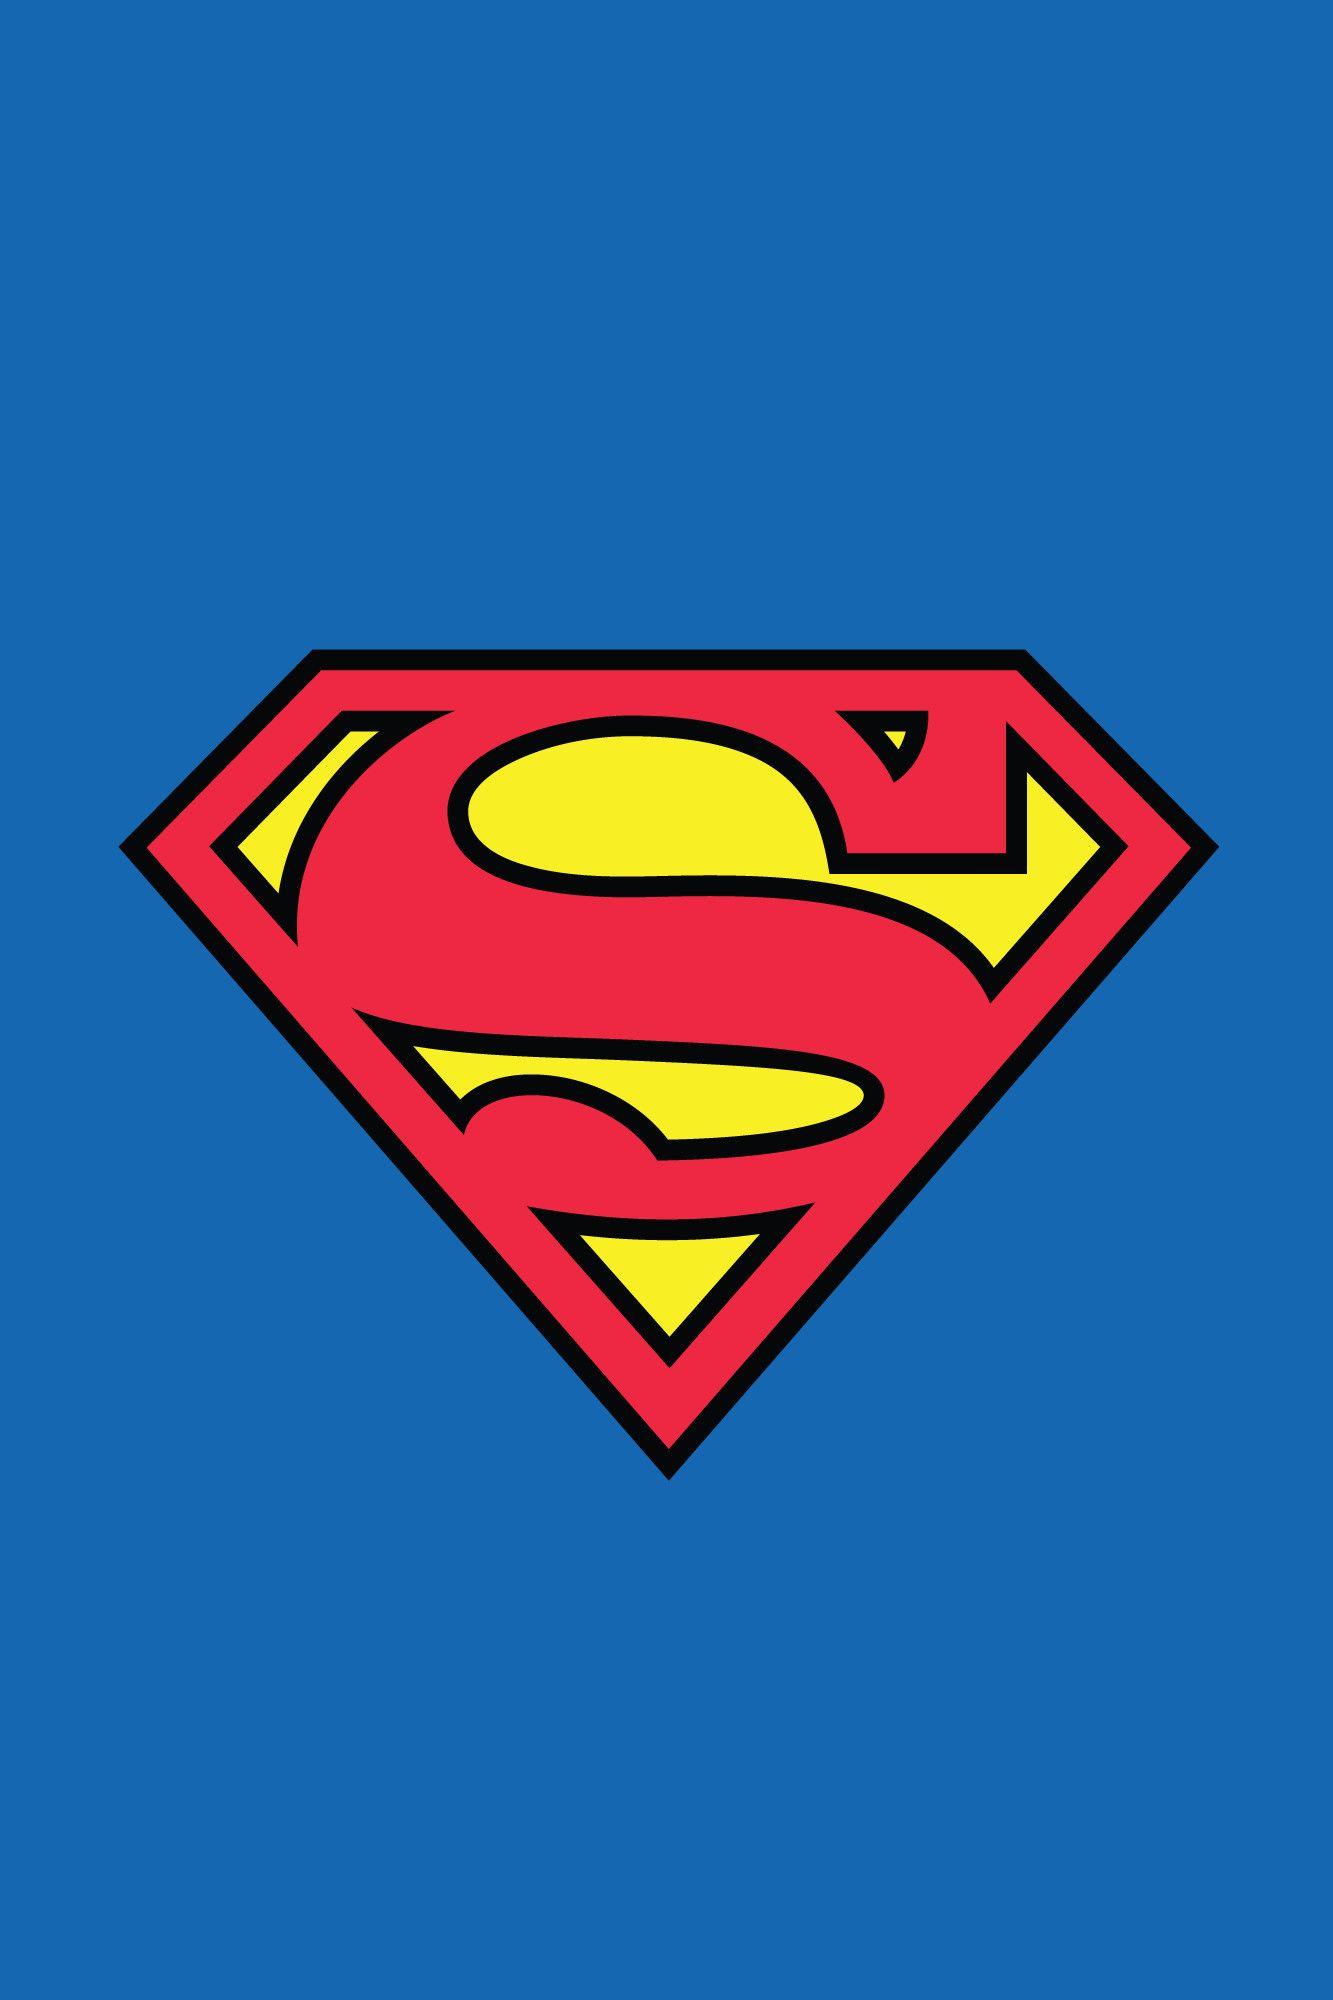 Superman Iphone Wallpapers Top Free Superman Iphone Backgrounds Wallpaperaccess